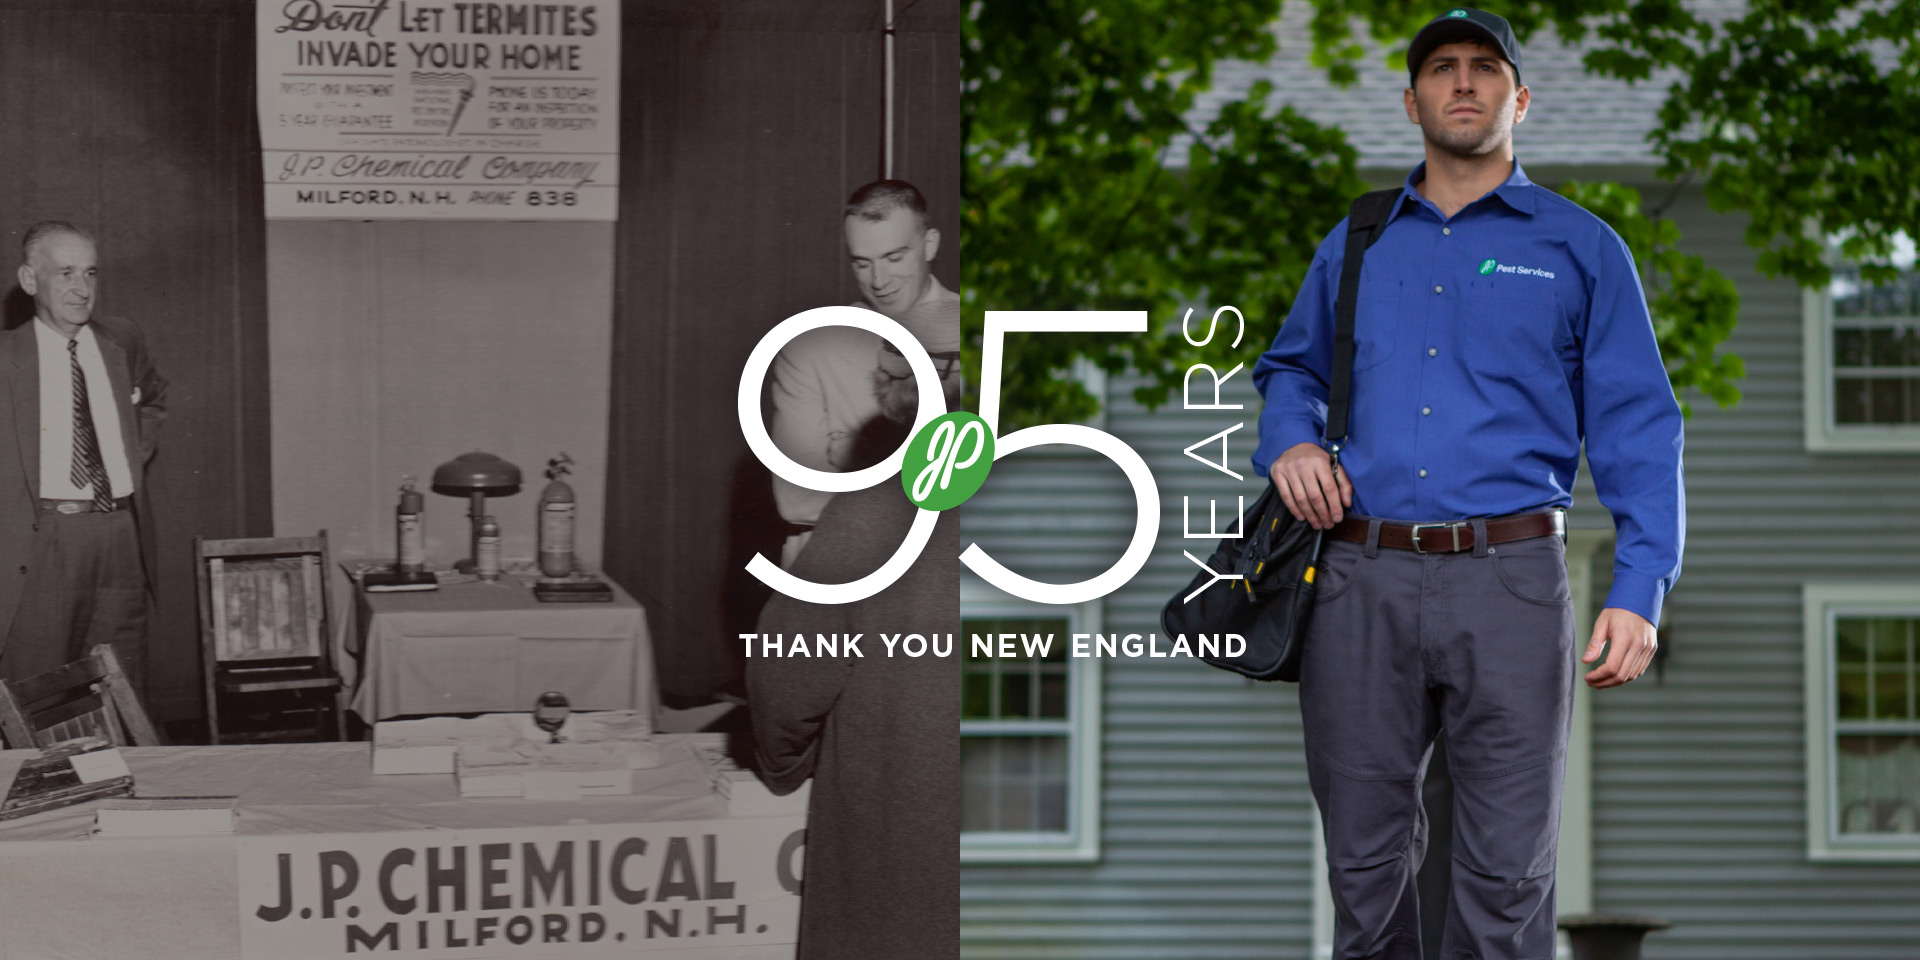 95 Years - Thank You New England